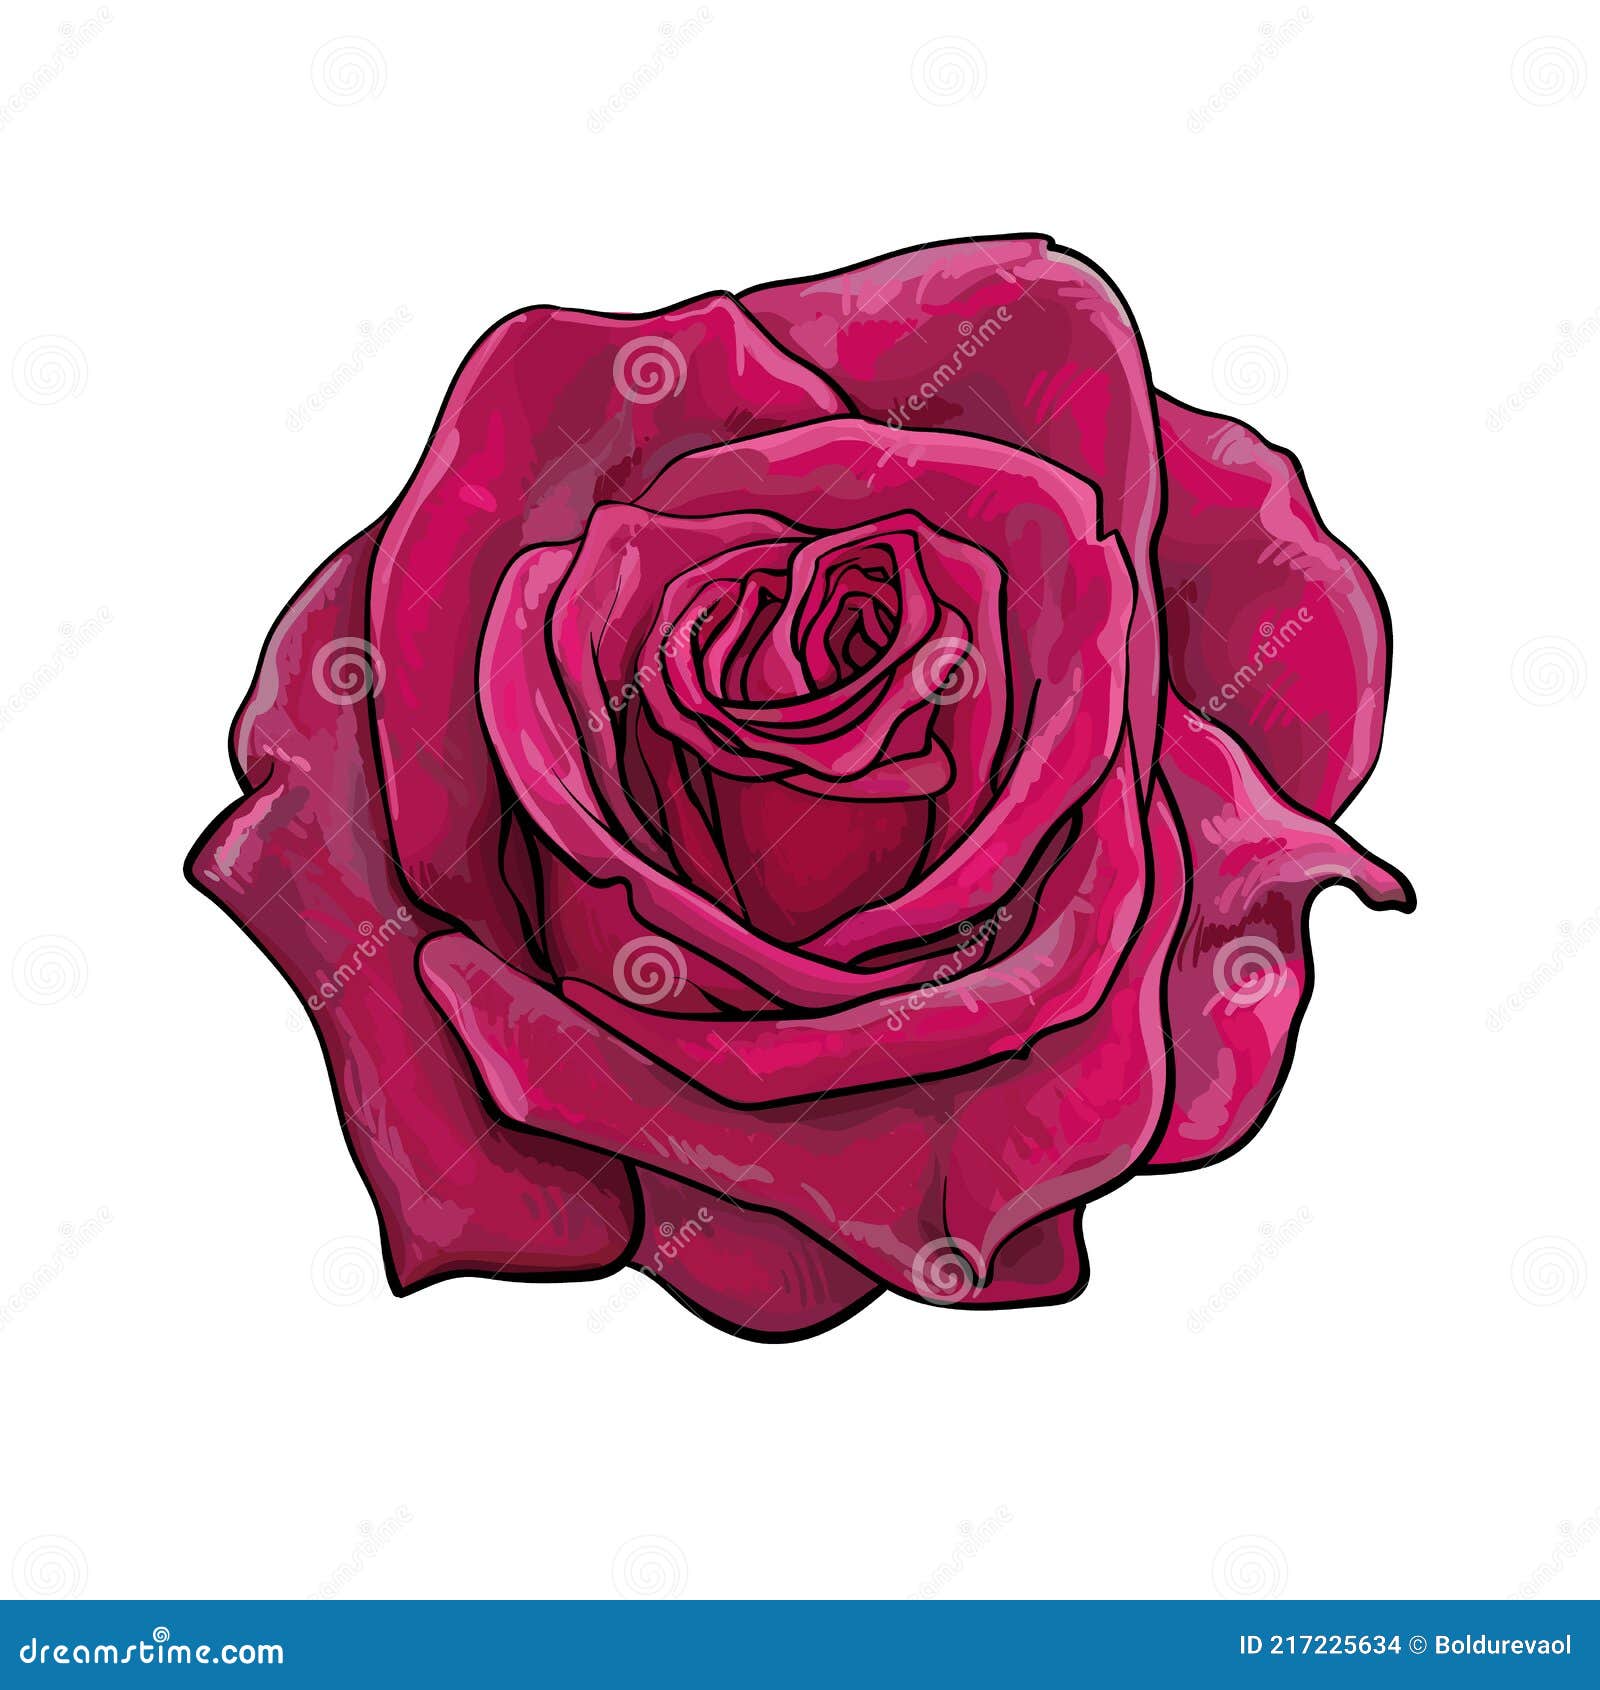 Realistic Hand Drawn Dark Red Rose Flower Fully Open. Vector Illustration  Isolated on White Background Stock Vector - Illustration of light,  greeting: 217225634